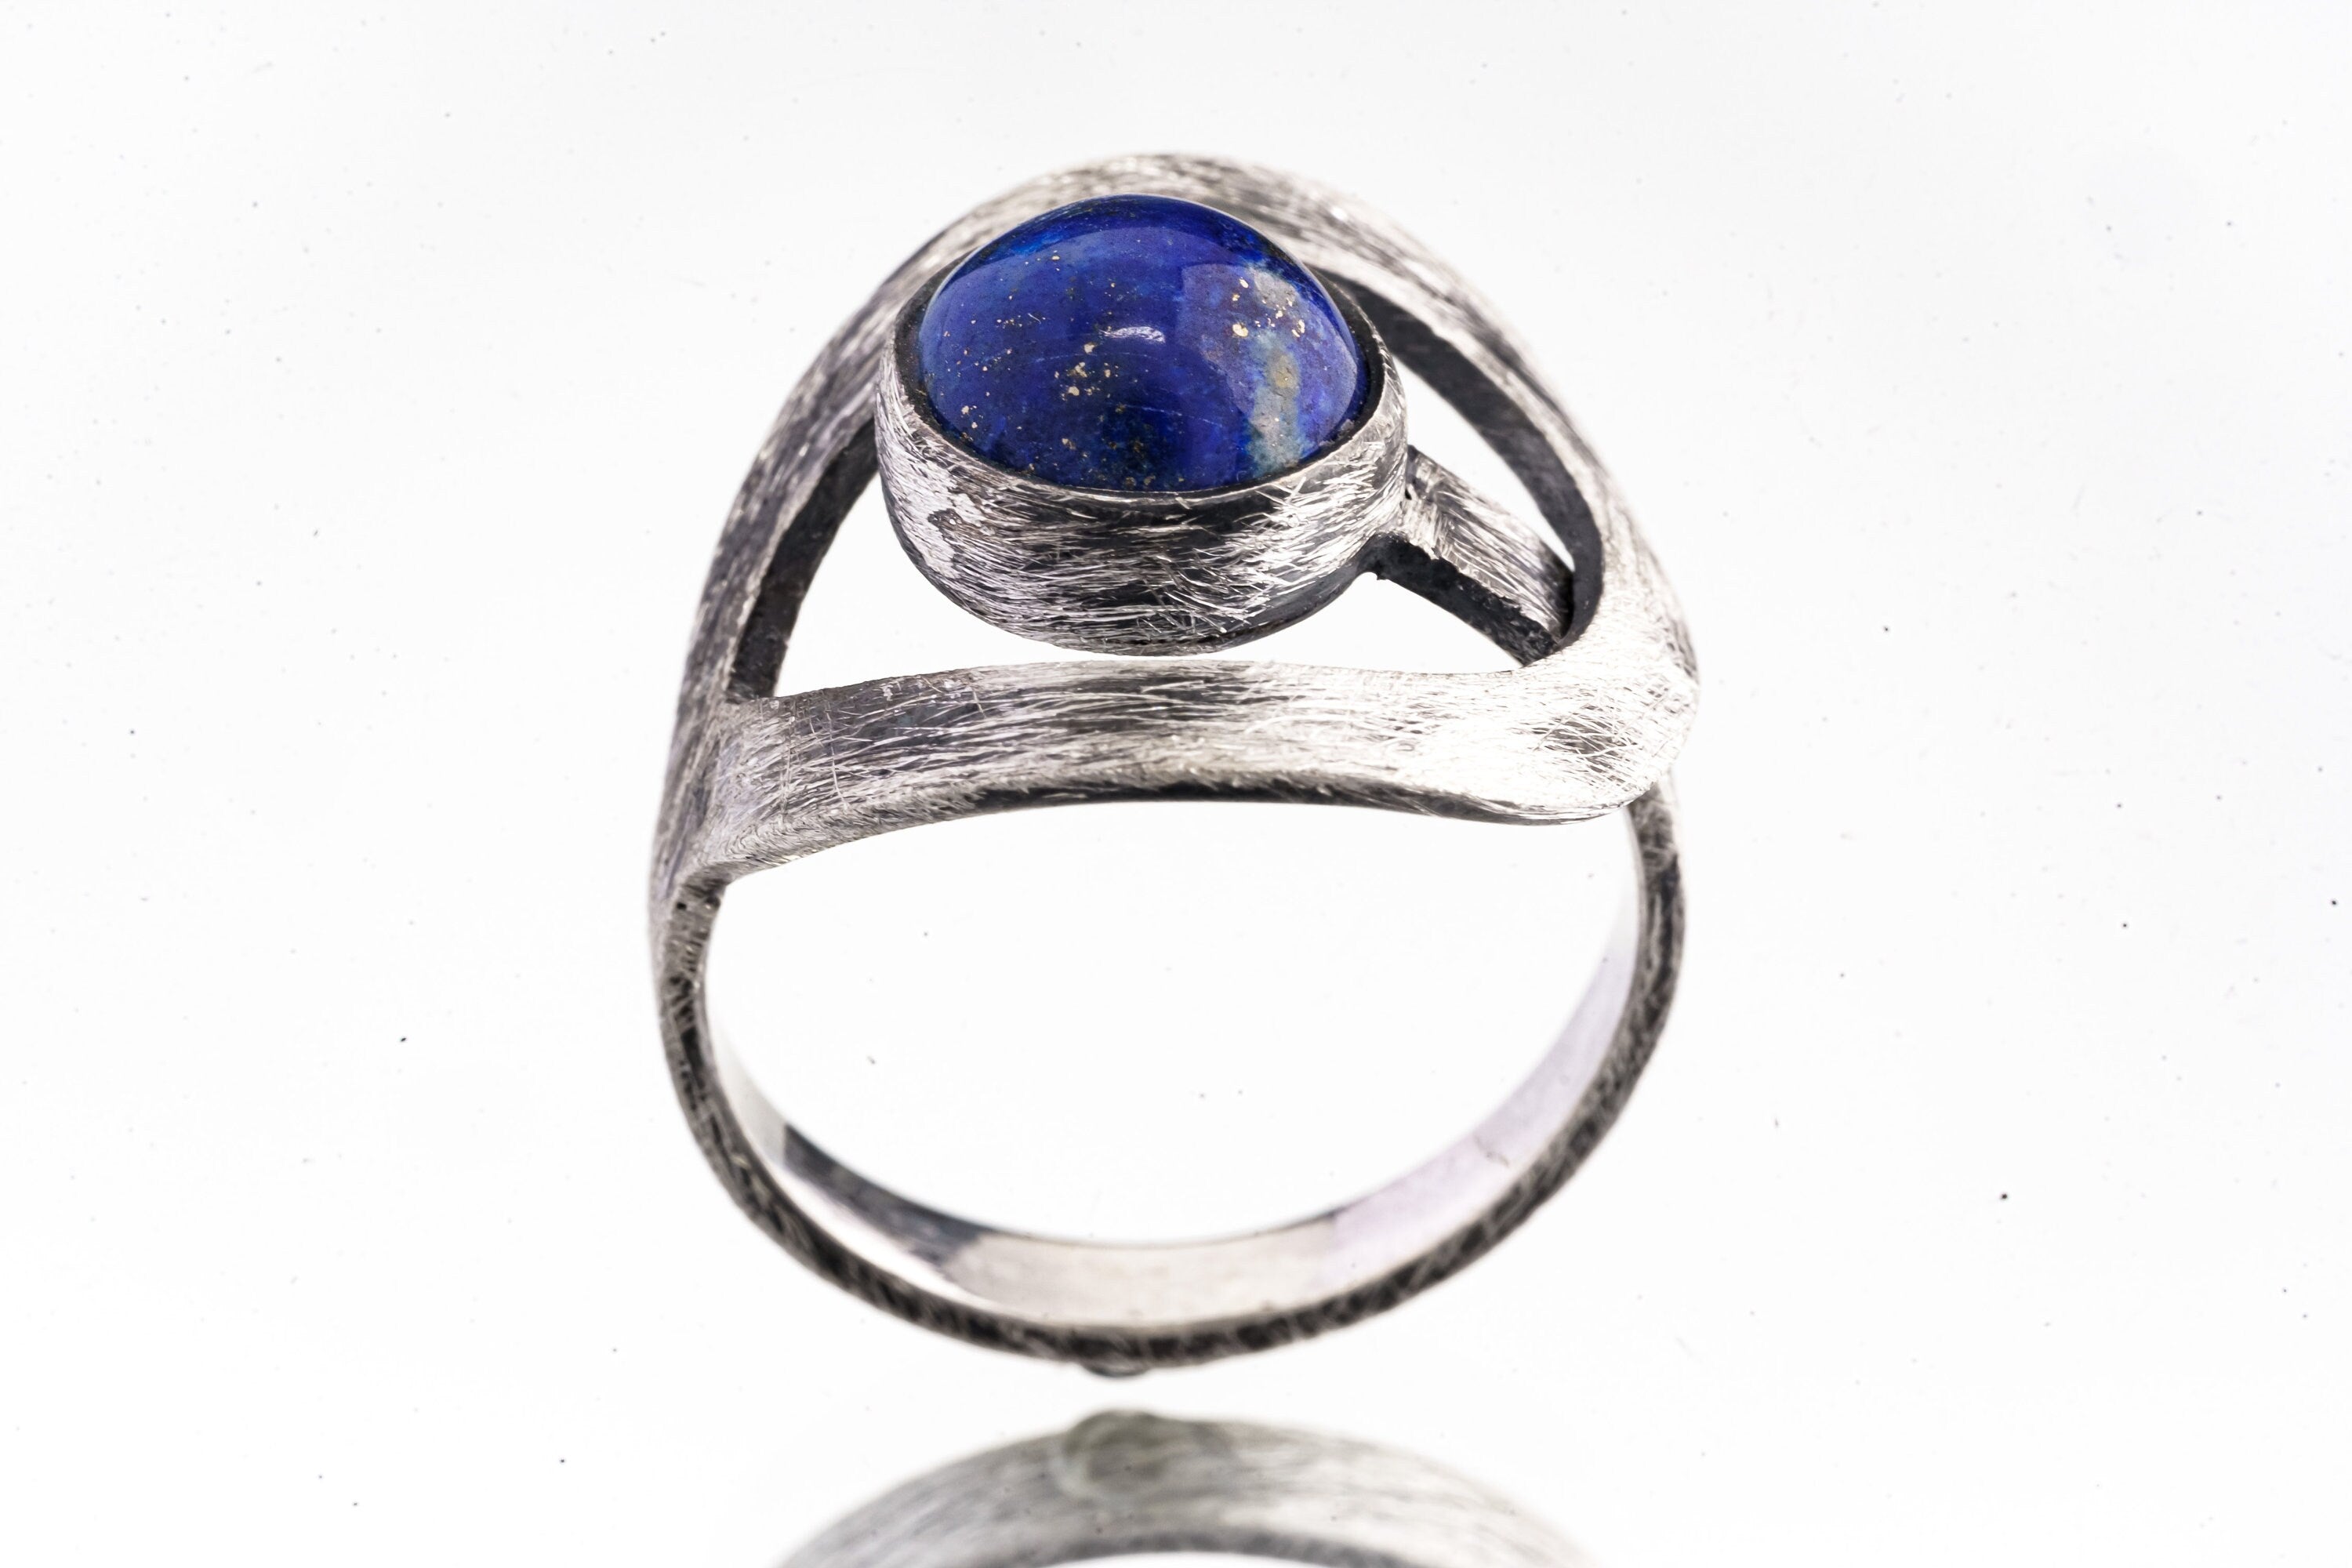 Round Lapis Lazuli - 925 Sterling Silver - Heavy Set Adjustable Loop Ring - Scratch Textured - Size 5-9 US - NO/21